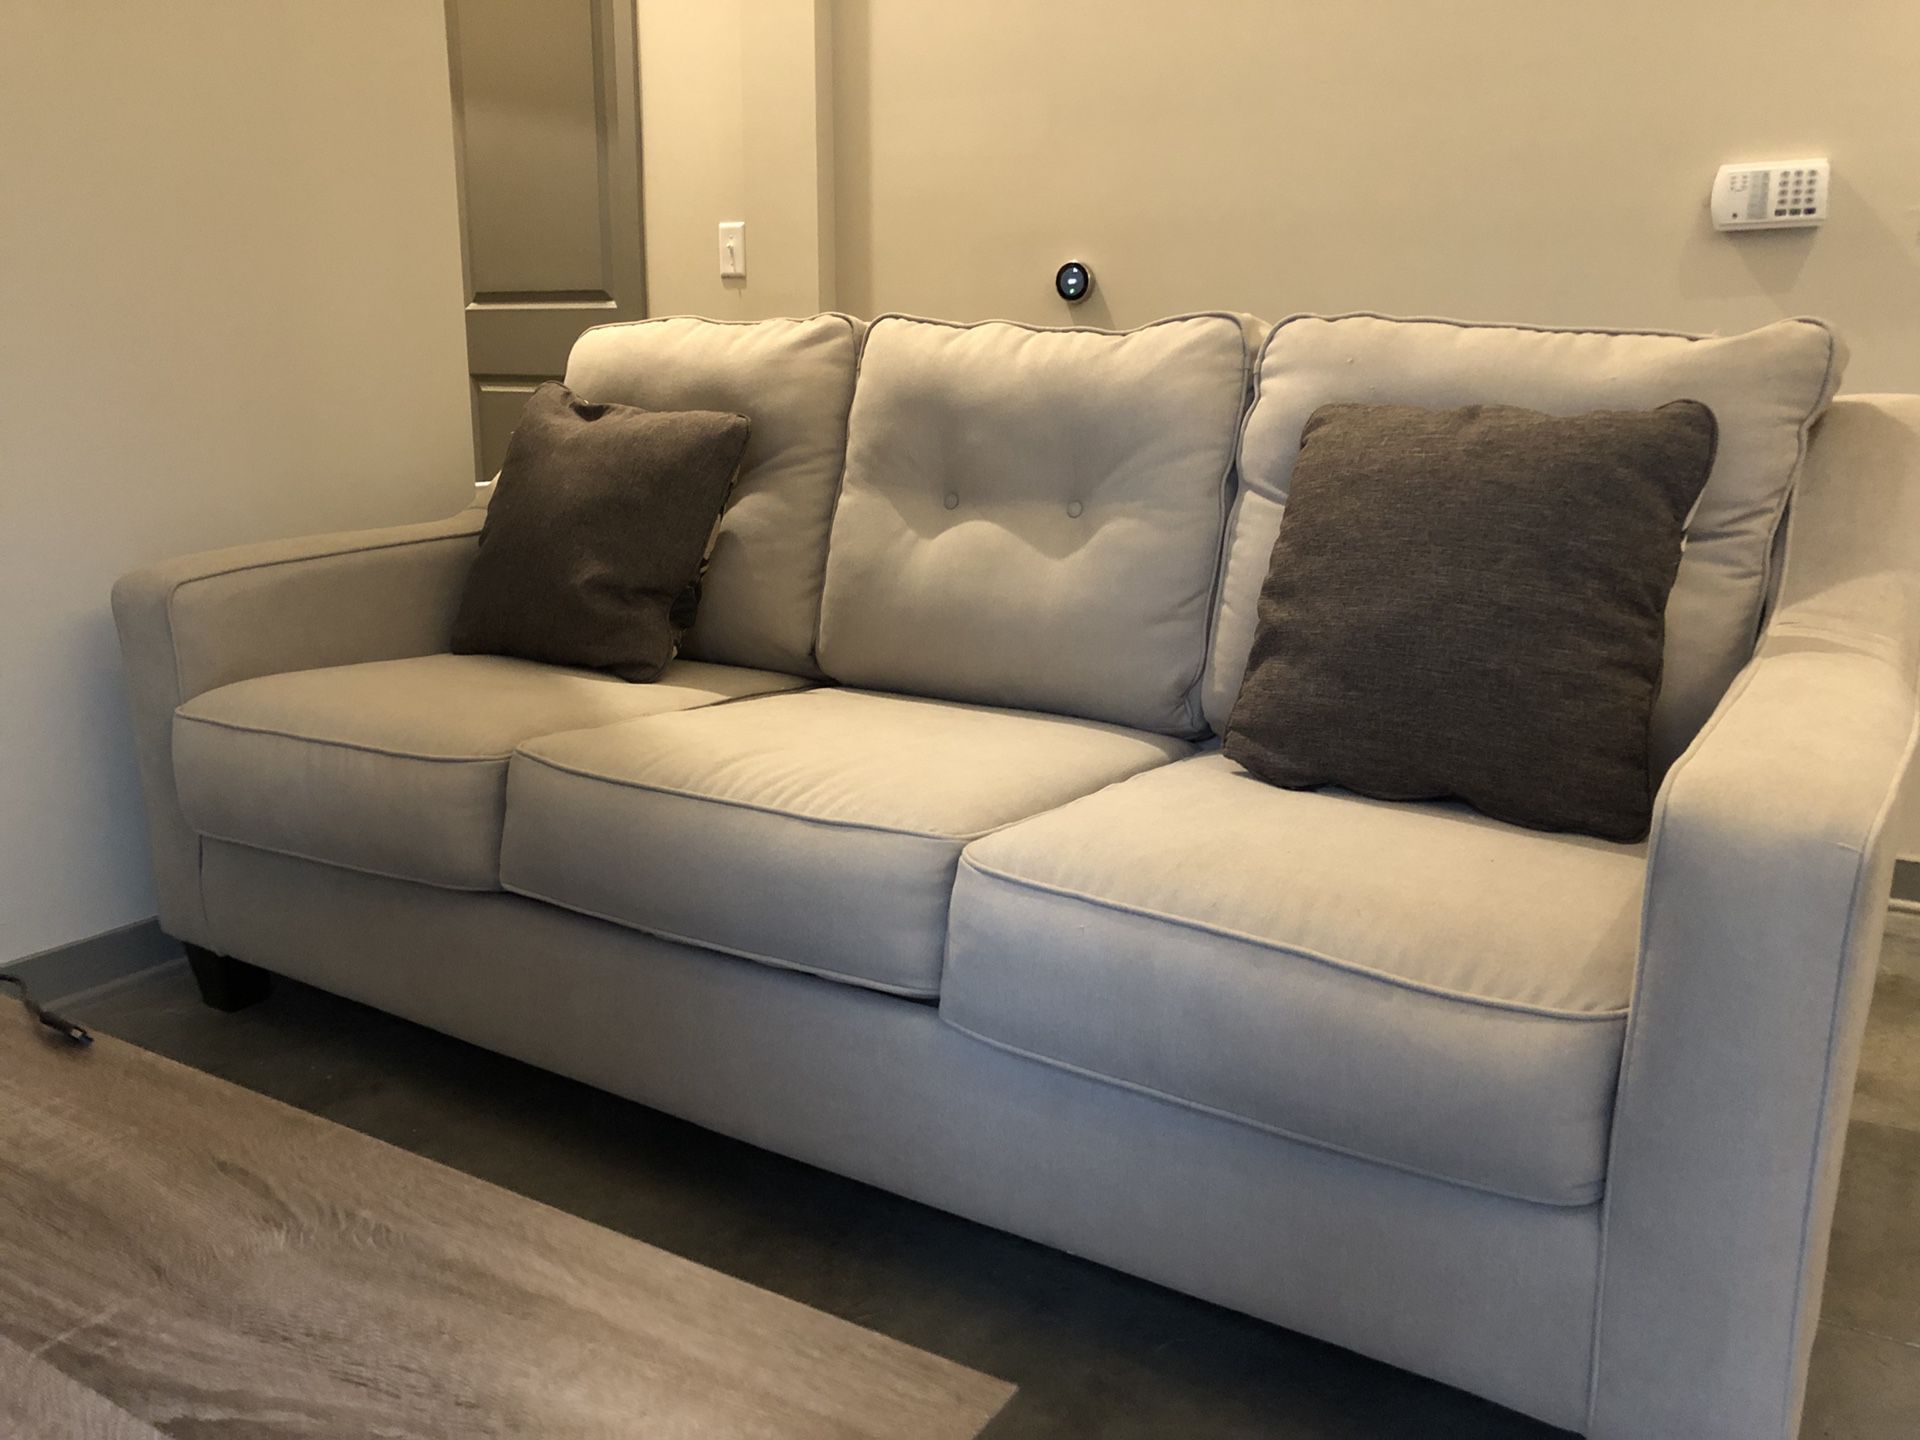 AMAZING COUCH! ALMOST BRAND NEW! $180